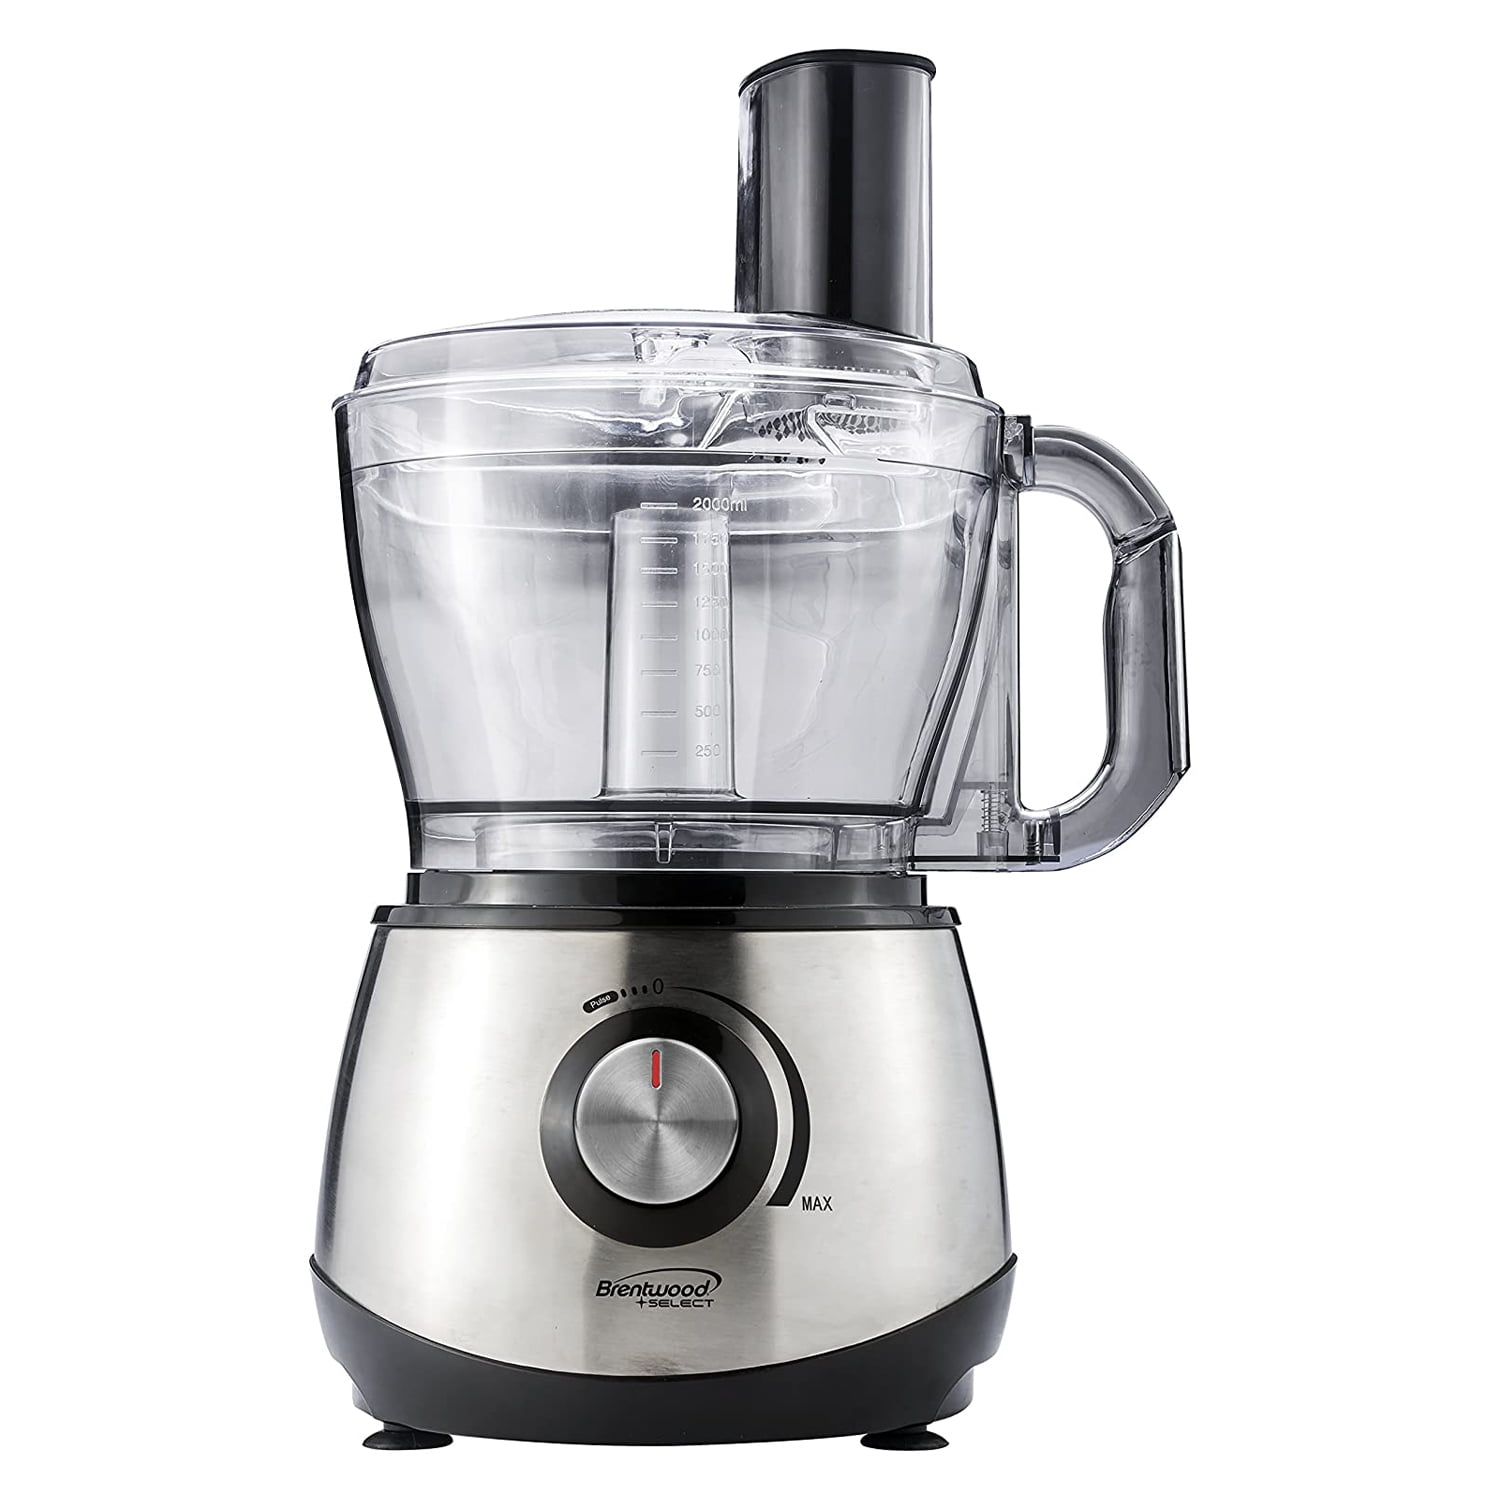  Brentwood Appliances FP-549W 3-Cup (White) Food Processors,  Normal: Home & Kitchen